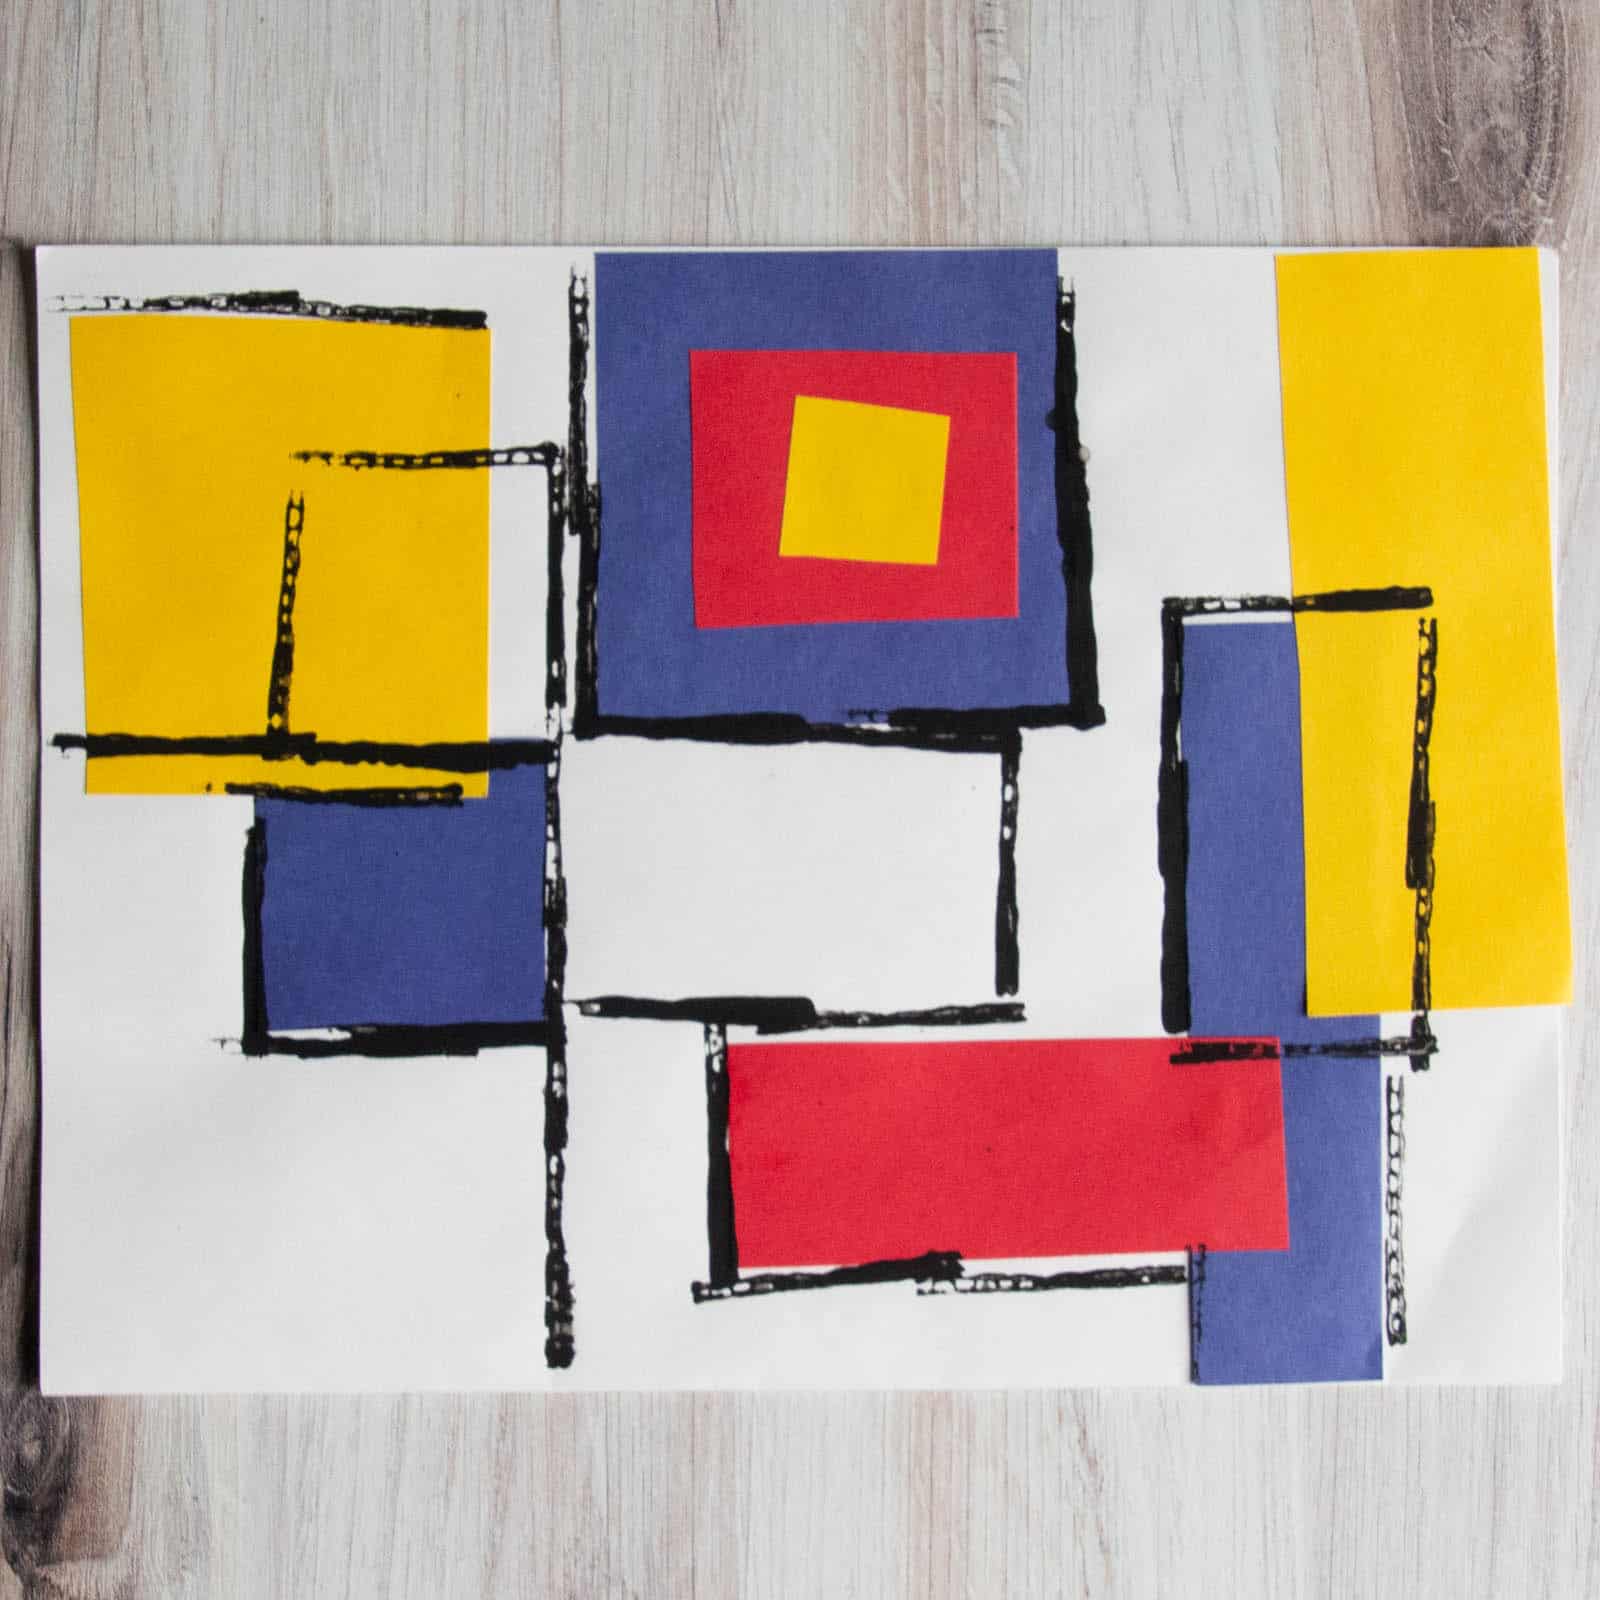 Primary Color Collages Inspired By Mondrian